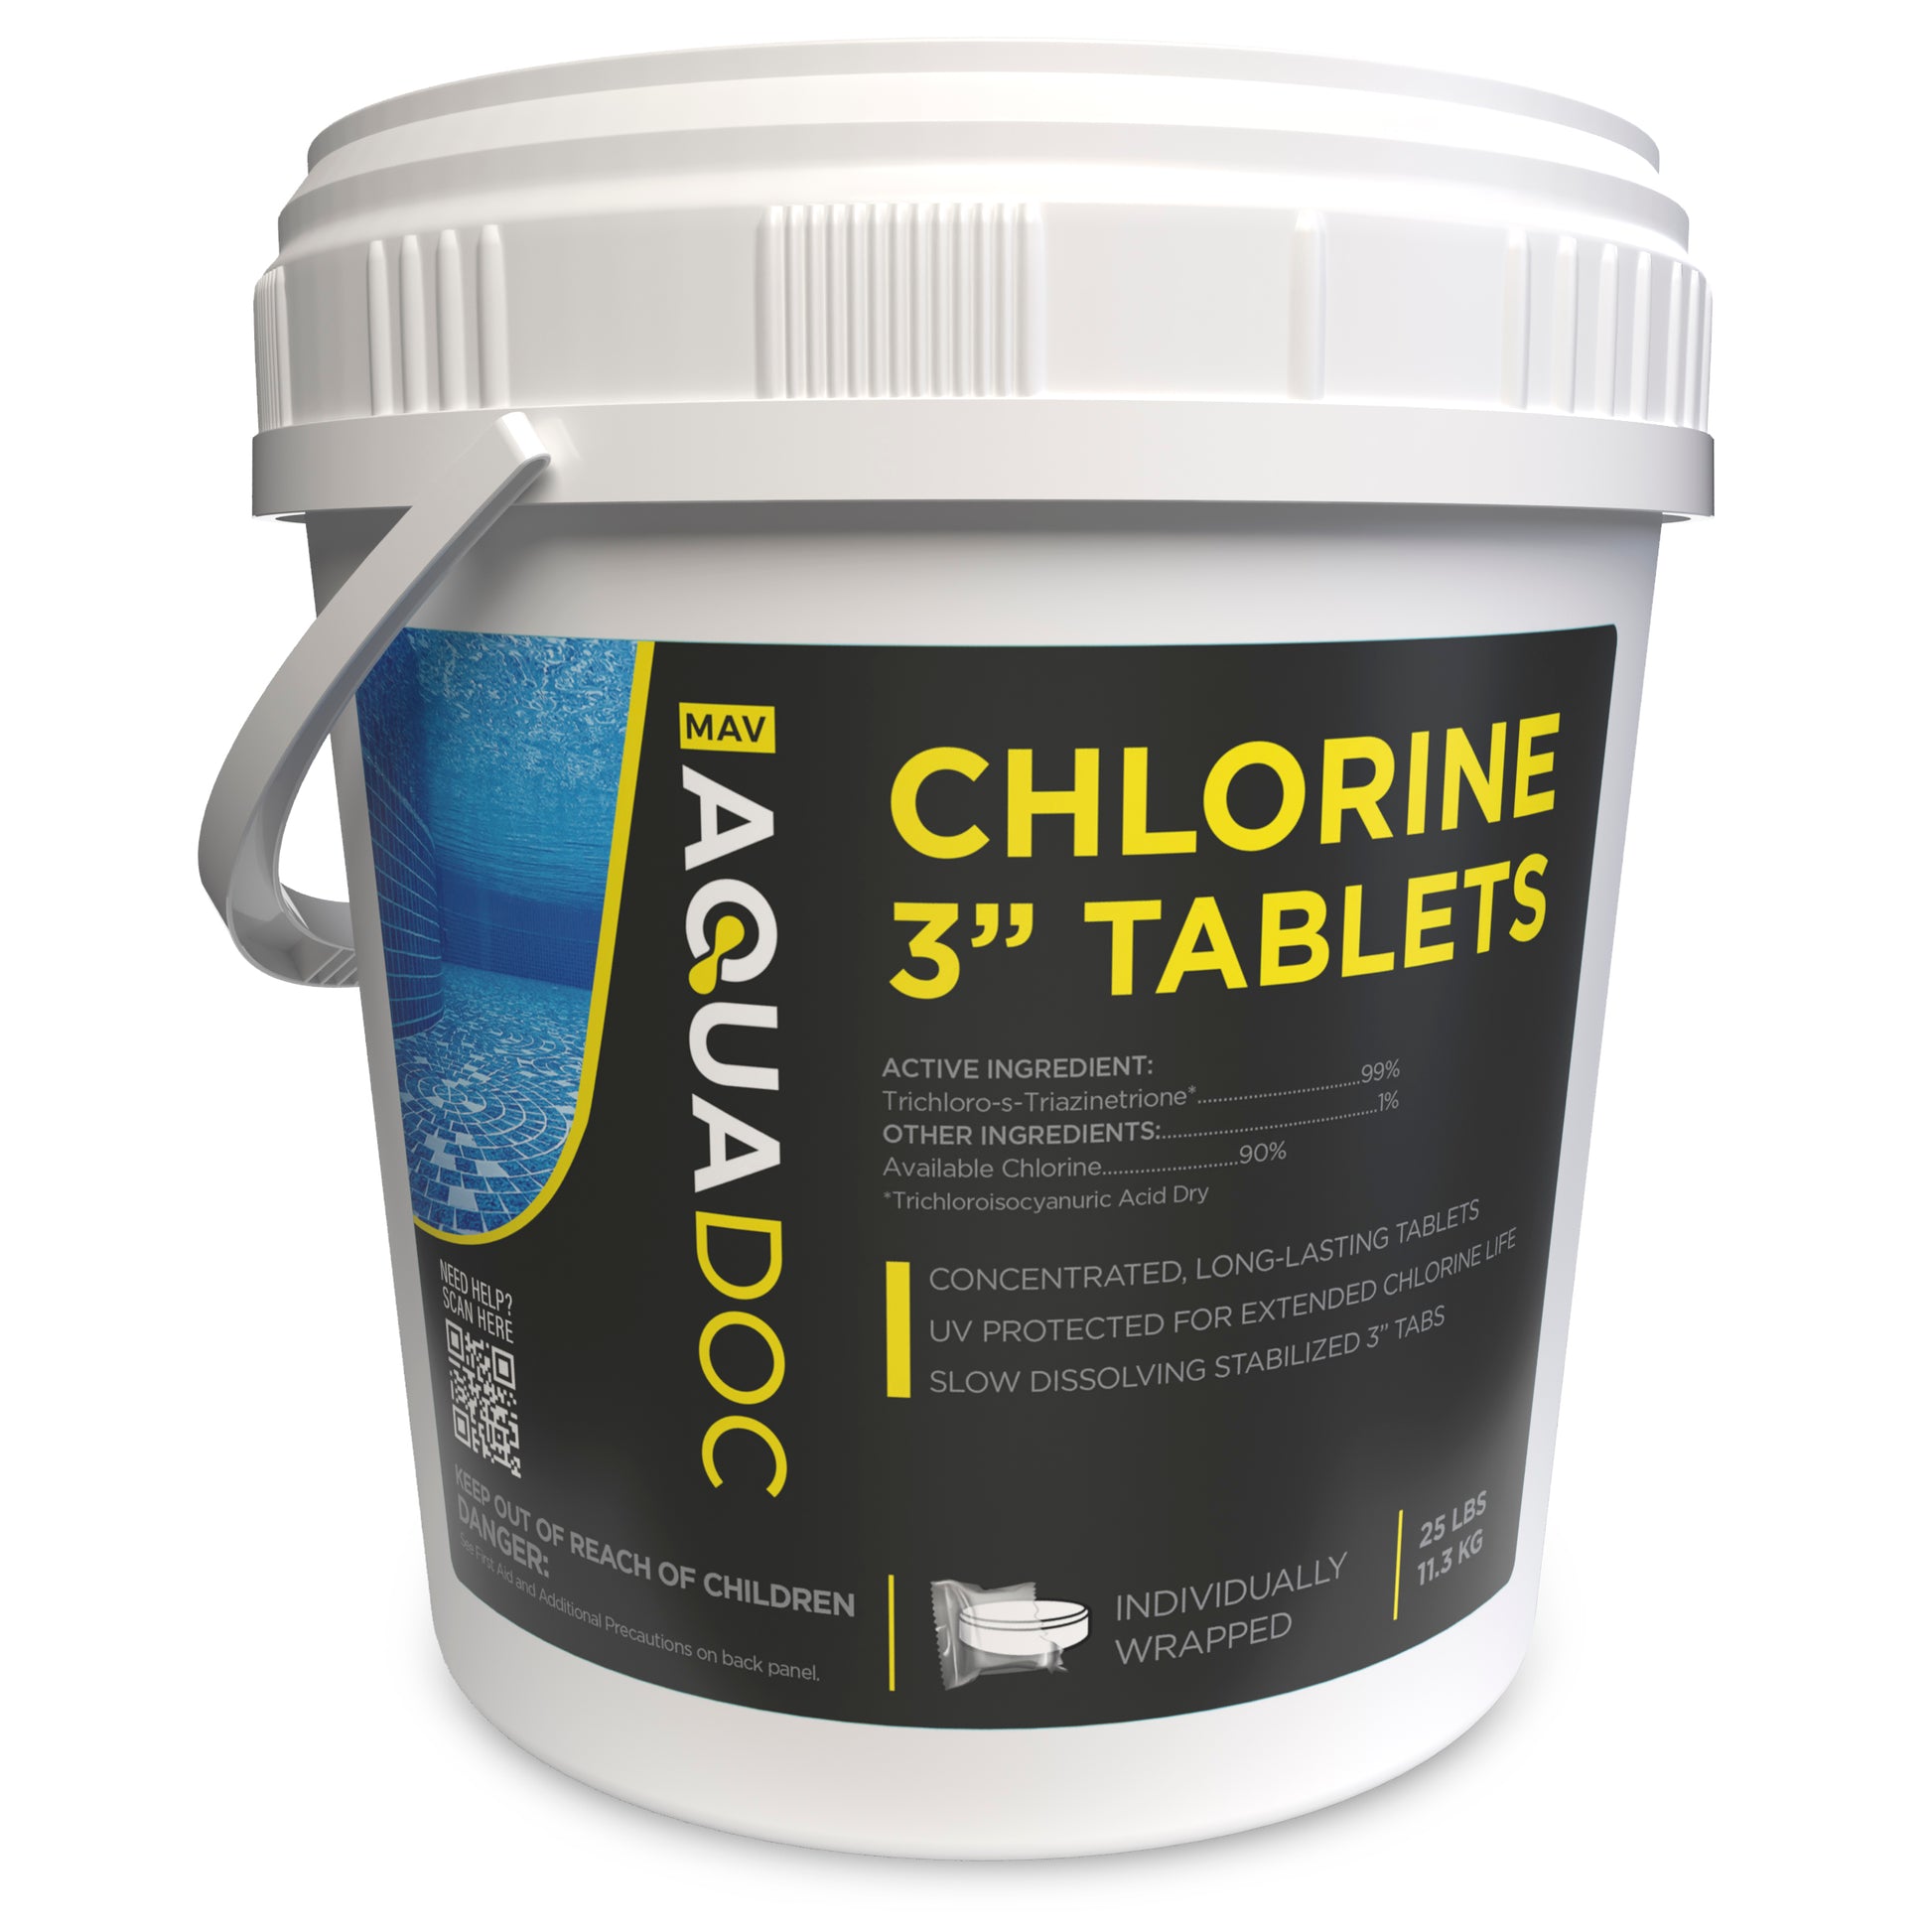 Best chlorine tablets in the market, now available in 25lbs